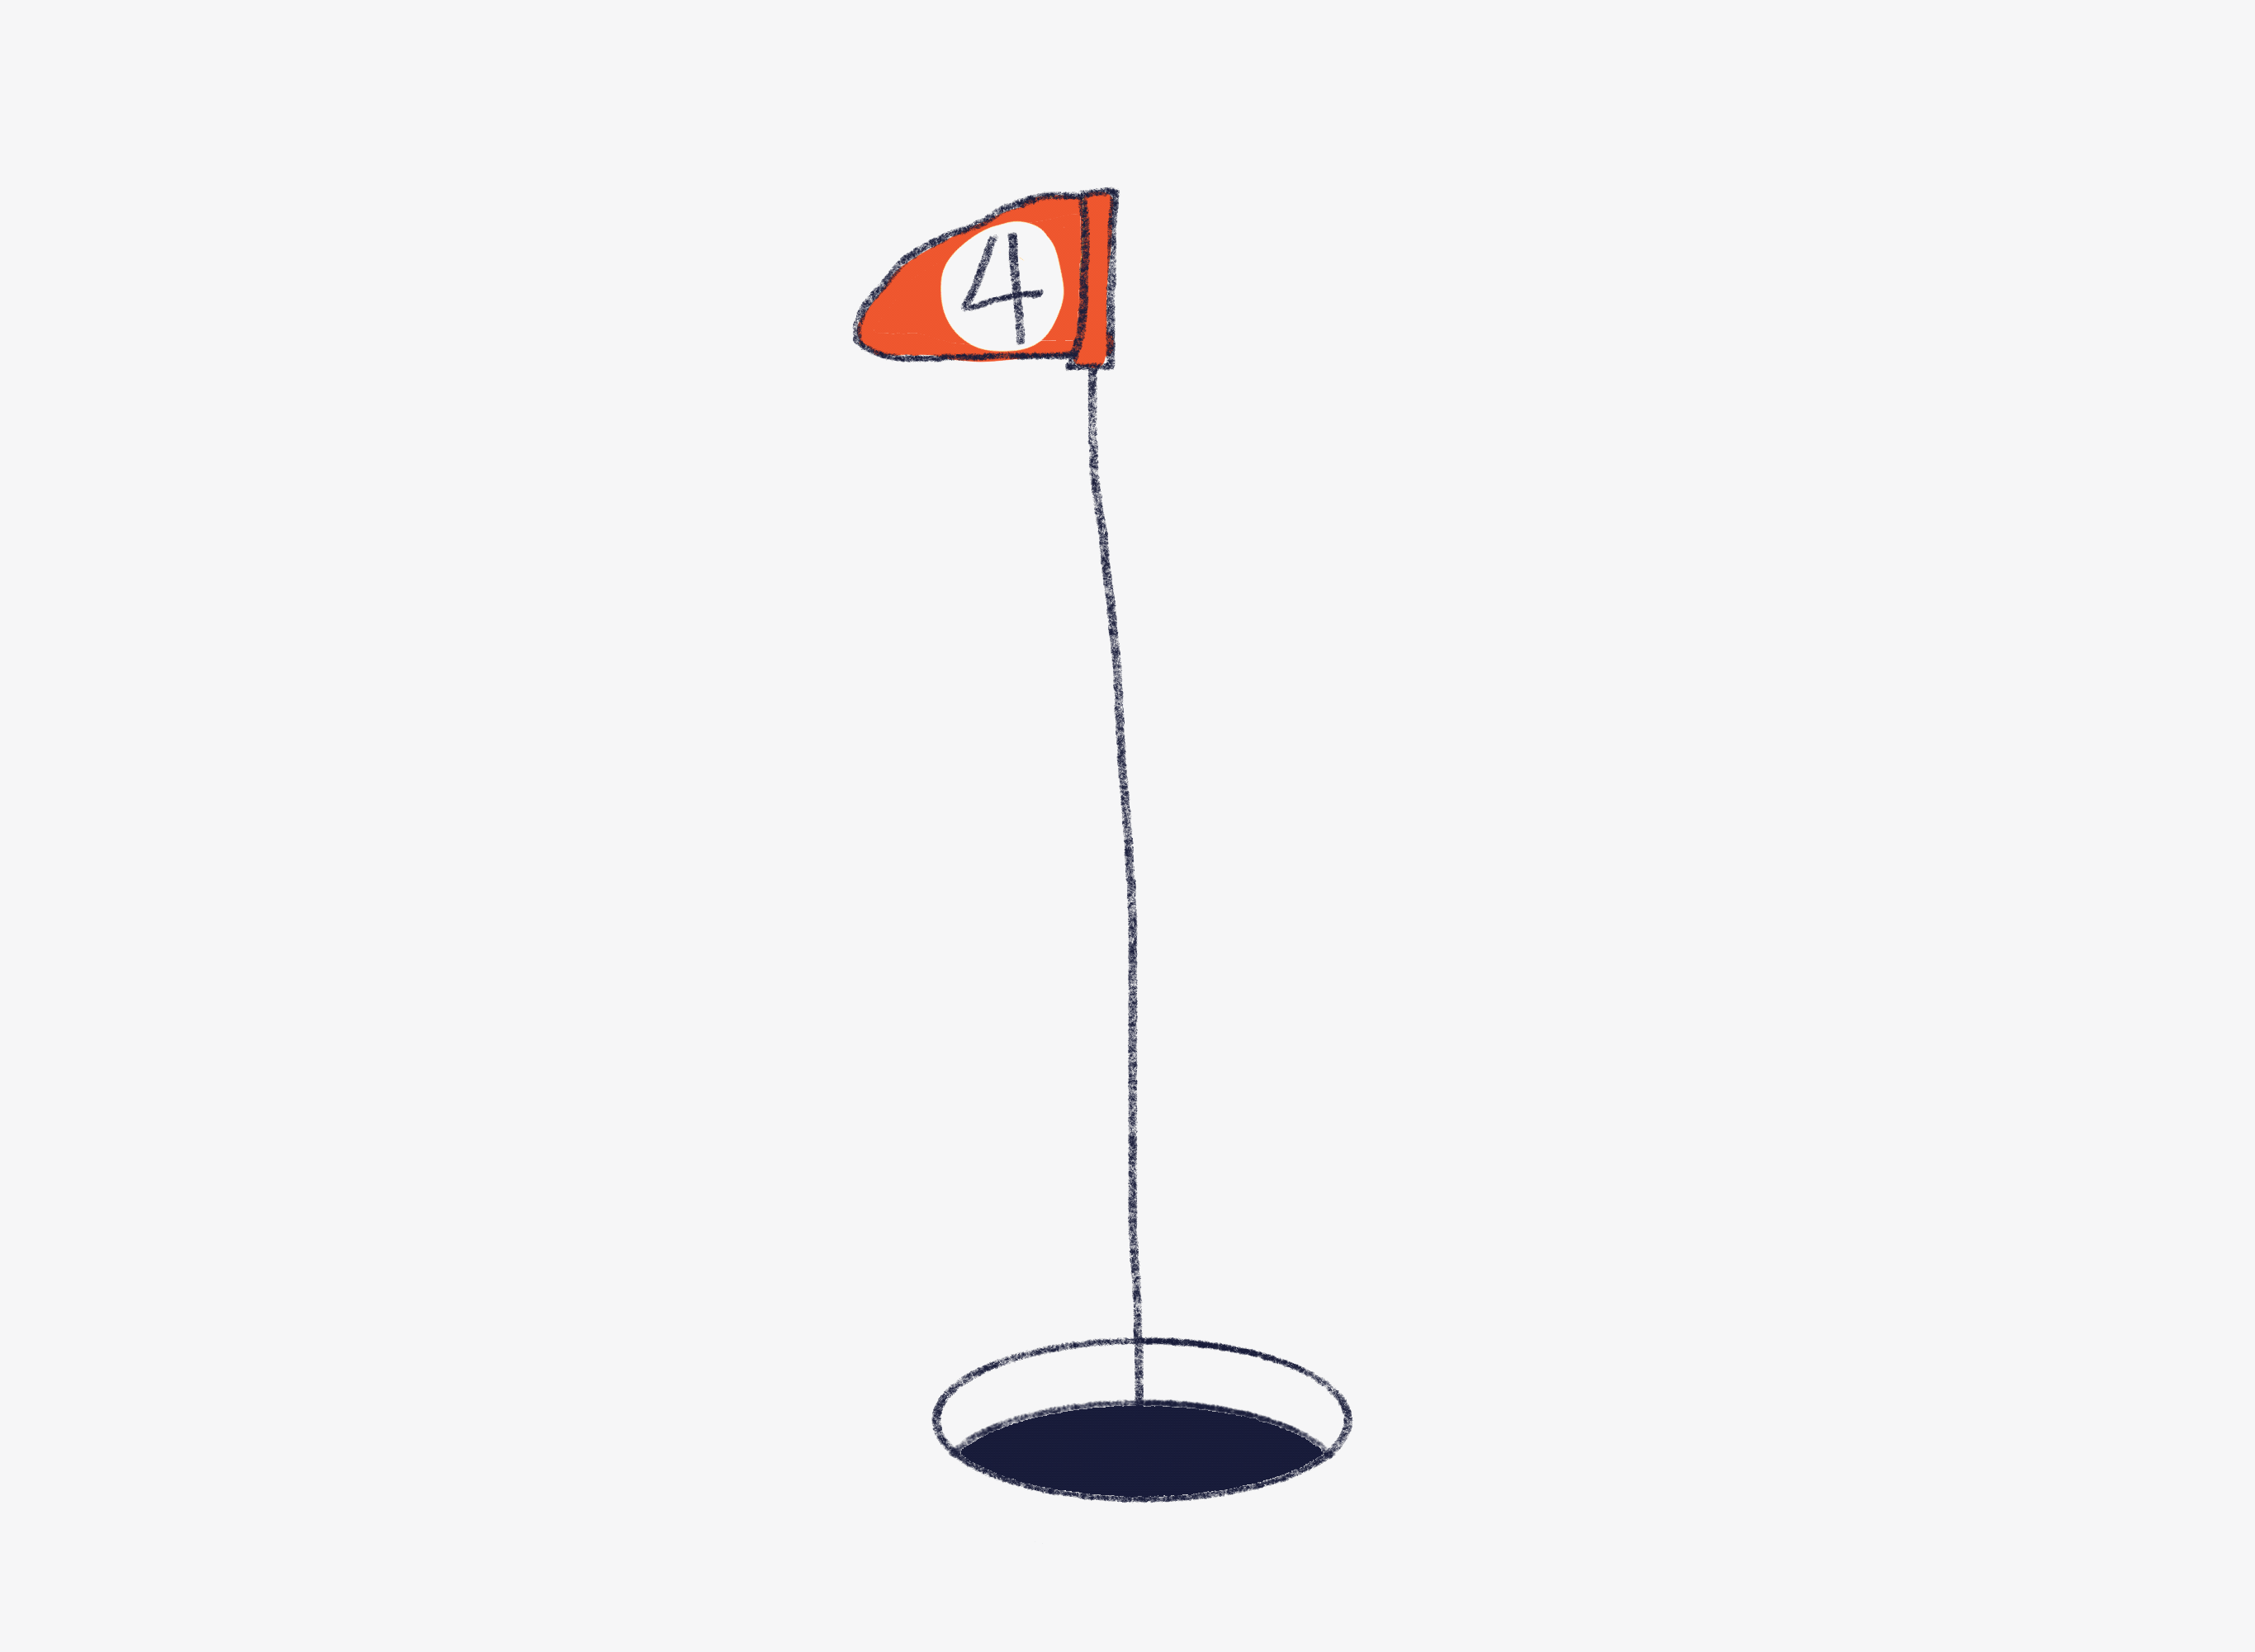 Hole in One animated animation confetti flag golf golf ball hole hole in 1 illustration mograph motion motion design motion graphics putt